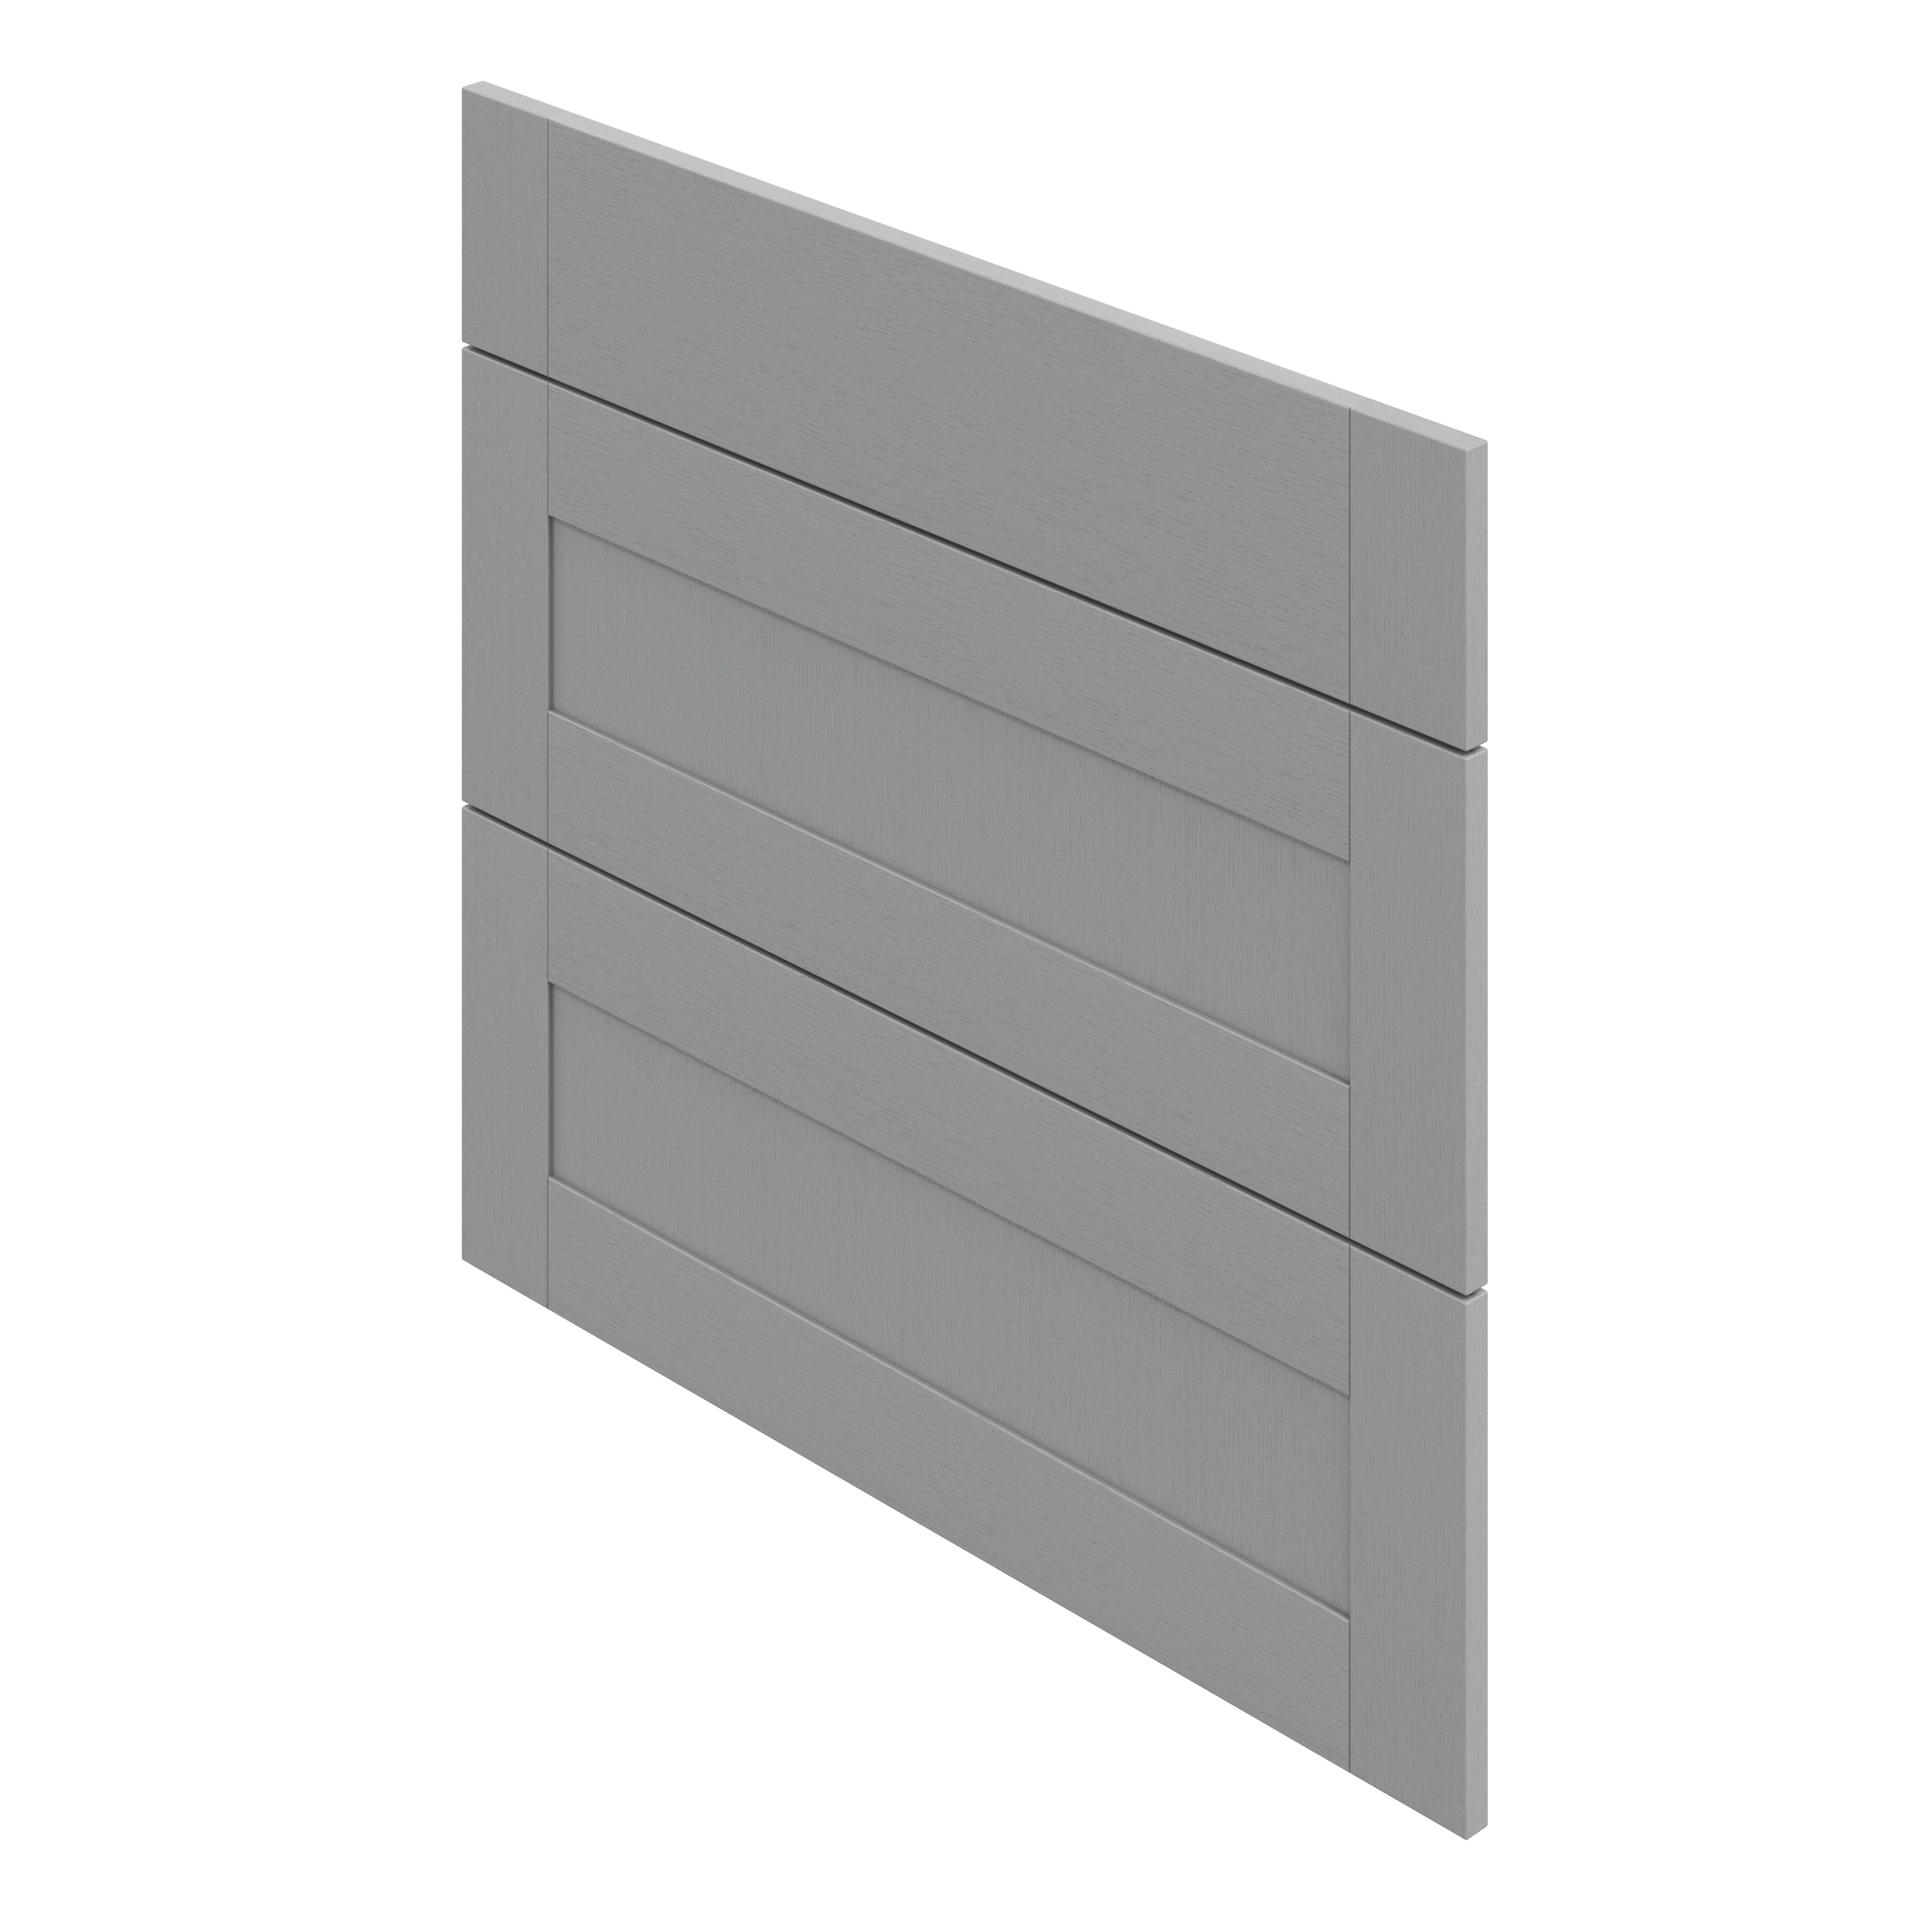 GoodHome Alpinia Matt Slate Grey Painted Wood Effect Shaker Drawer front (W)800mm, Pack of 3